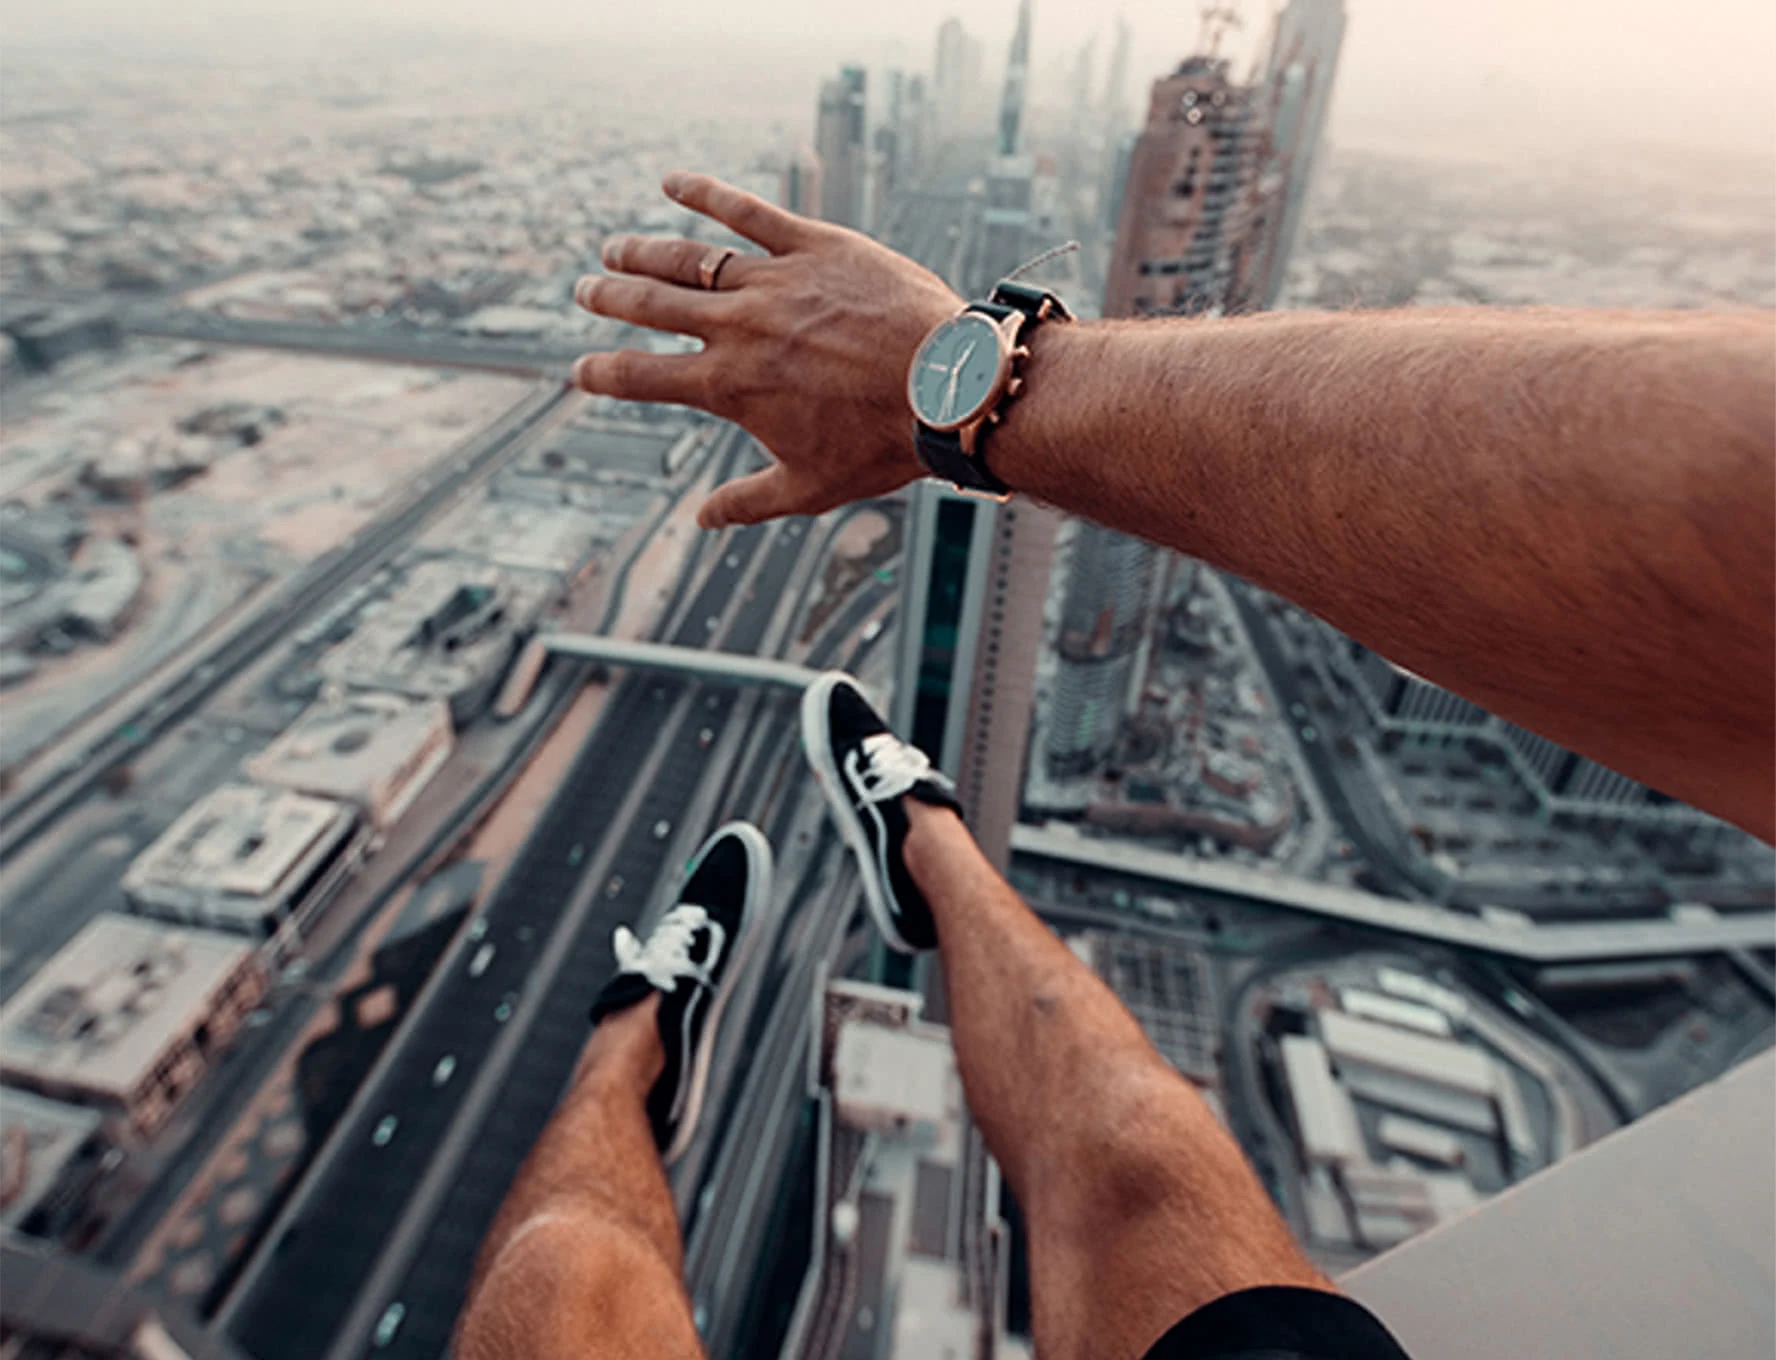 Dangling legs in black trainers and an arm wearing a wrist watch above a vast cityscape